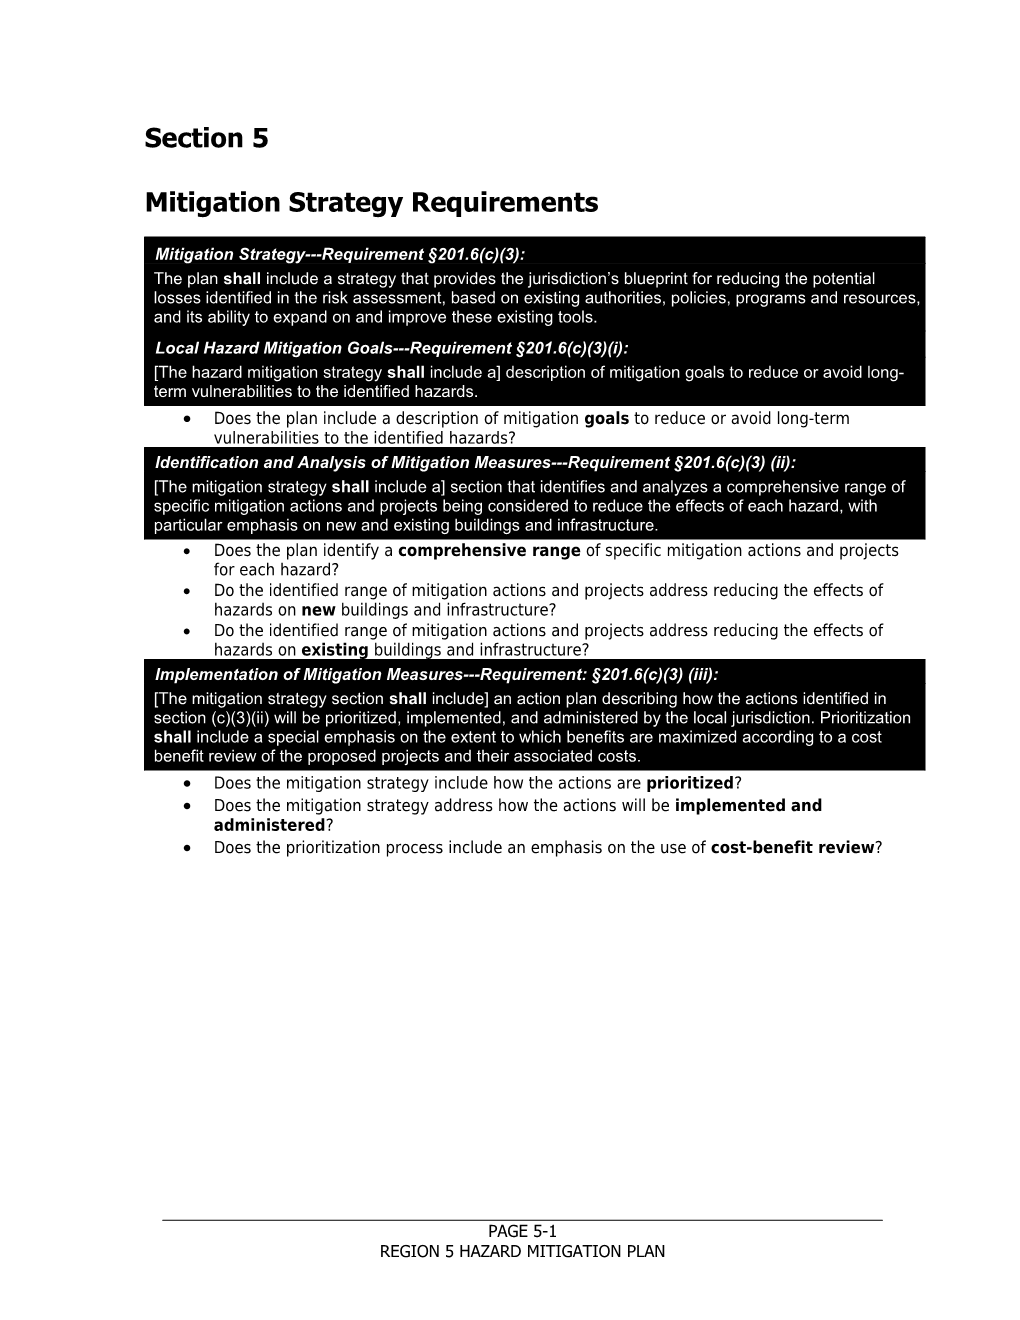 Mitigation Strategy Requirements